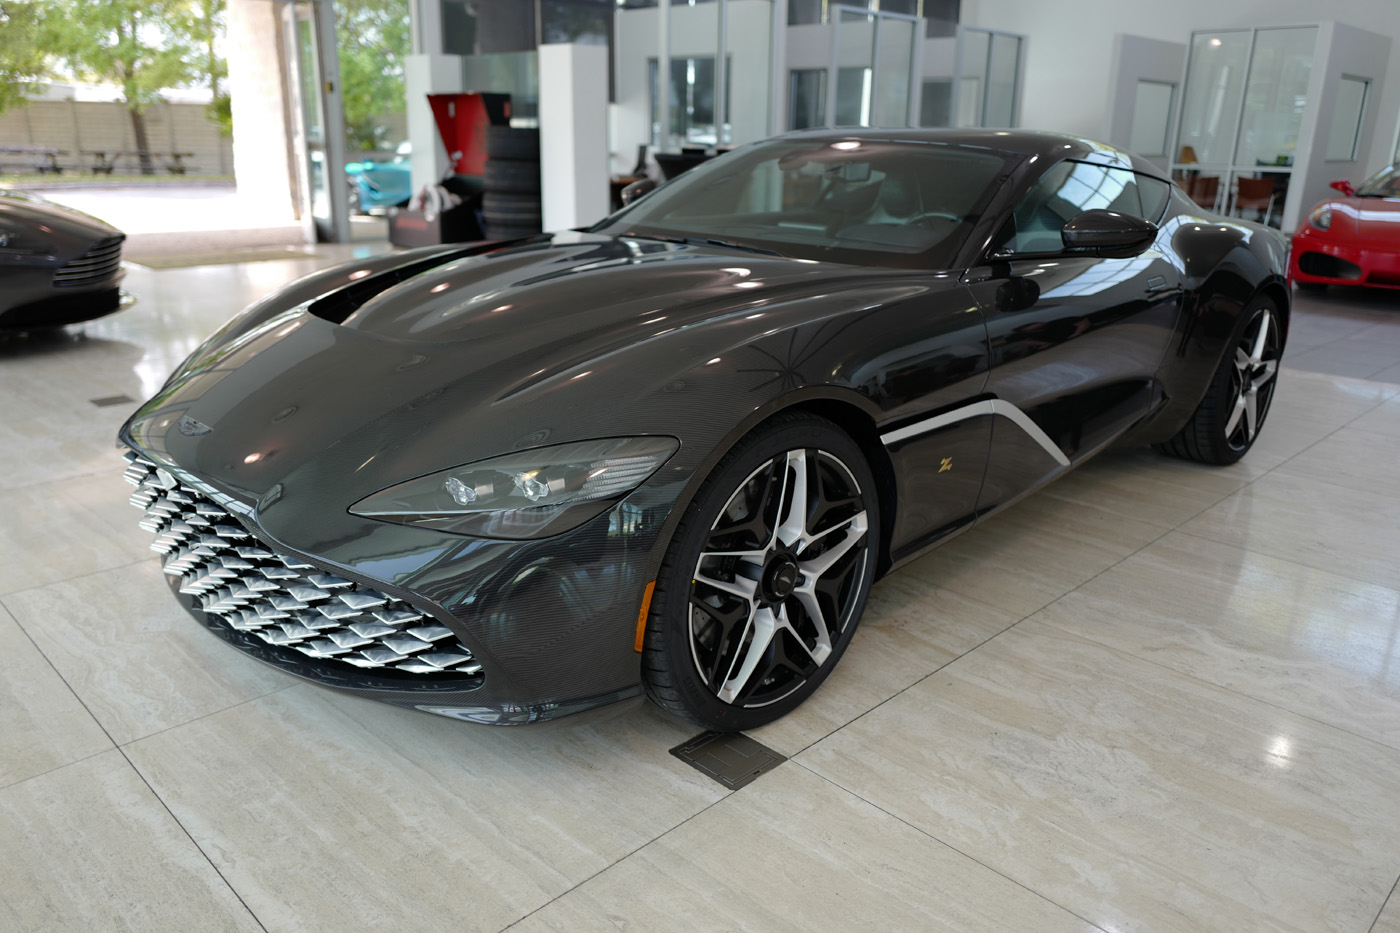 image-of-bare-carbon-zagato-DBS-GT-delivered-to-owner